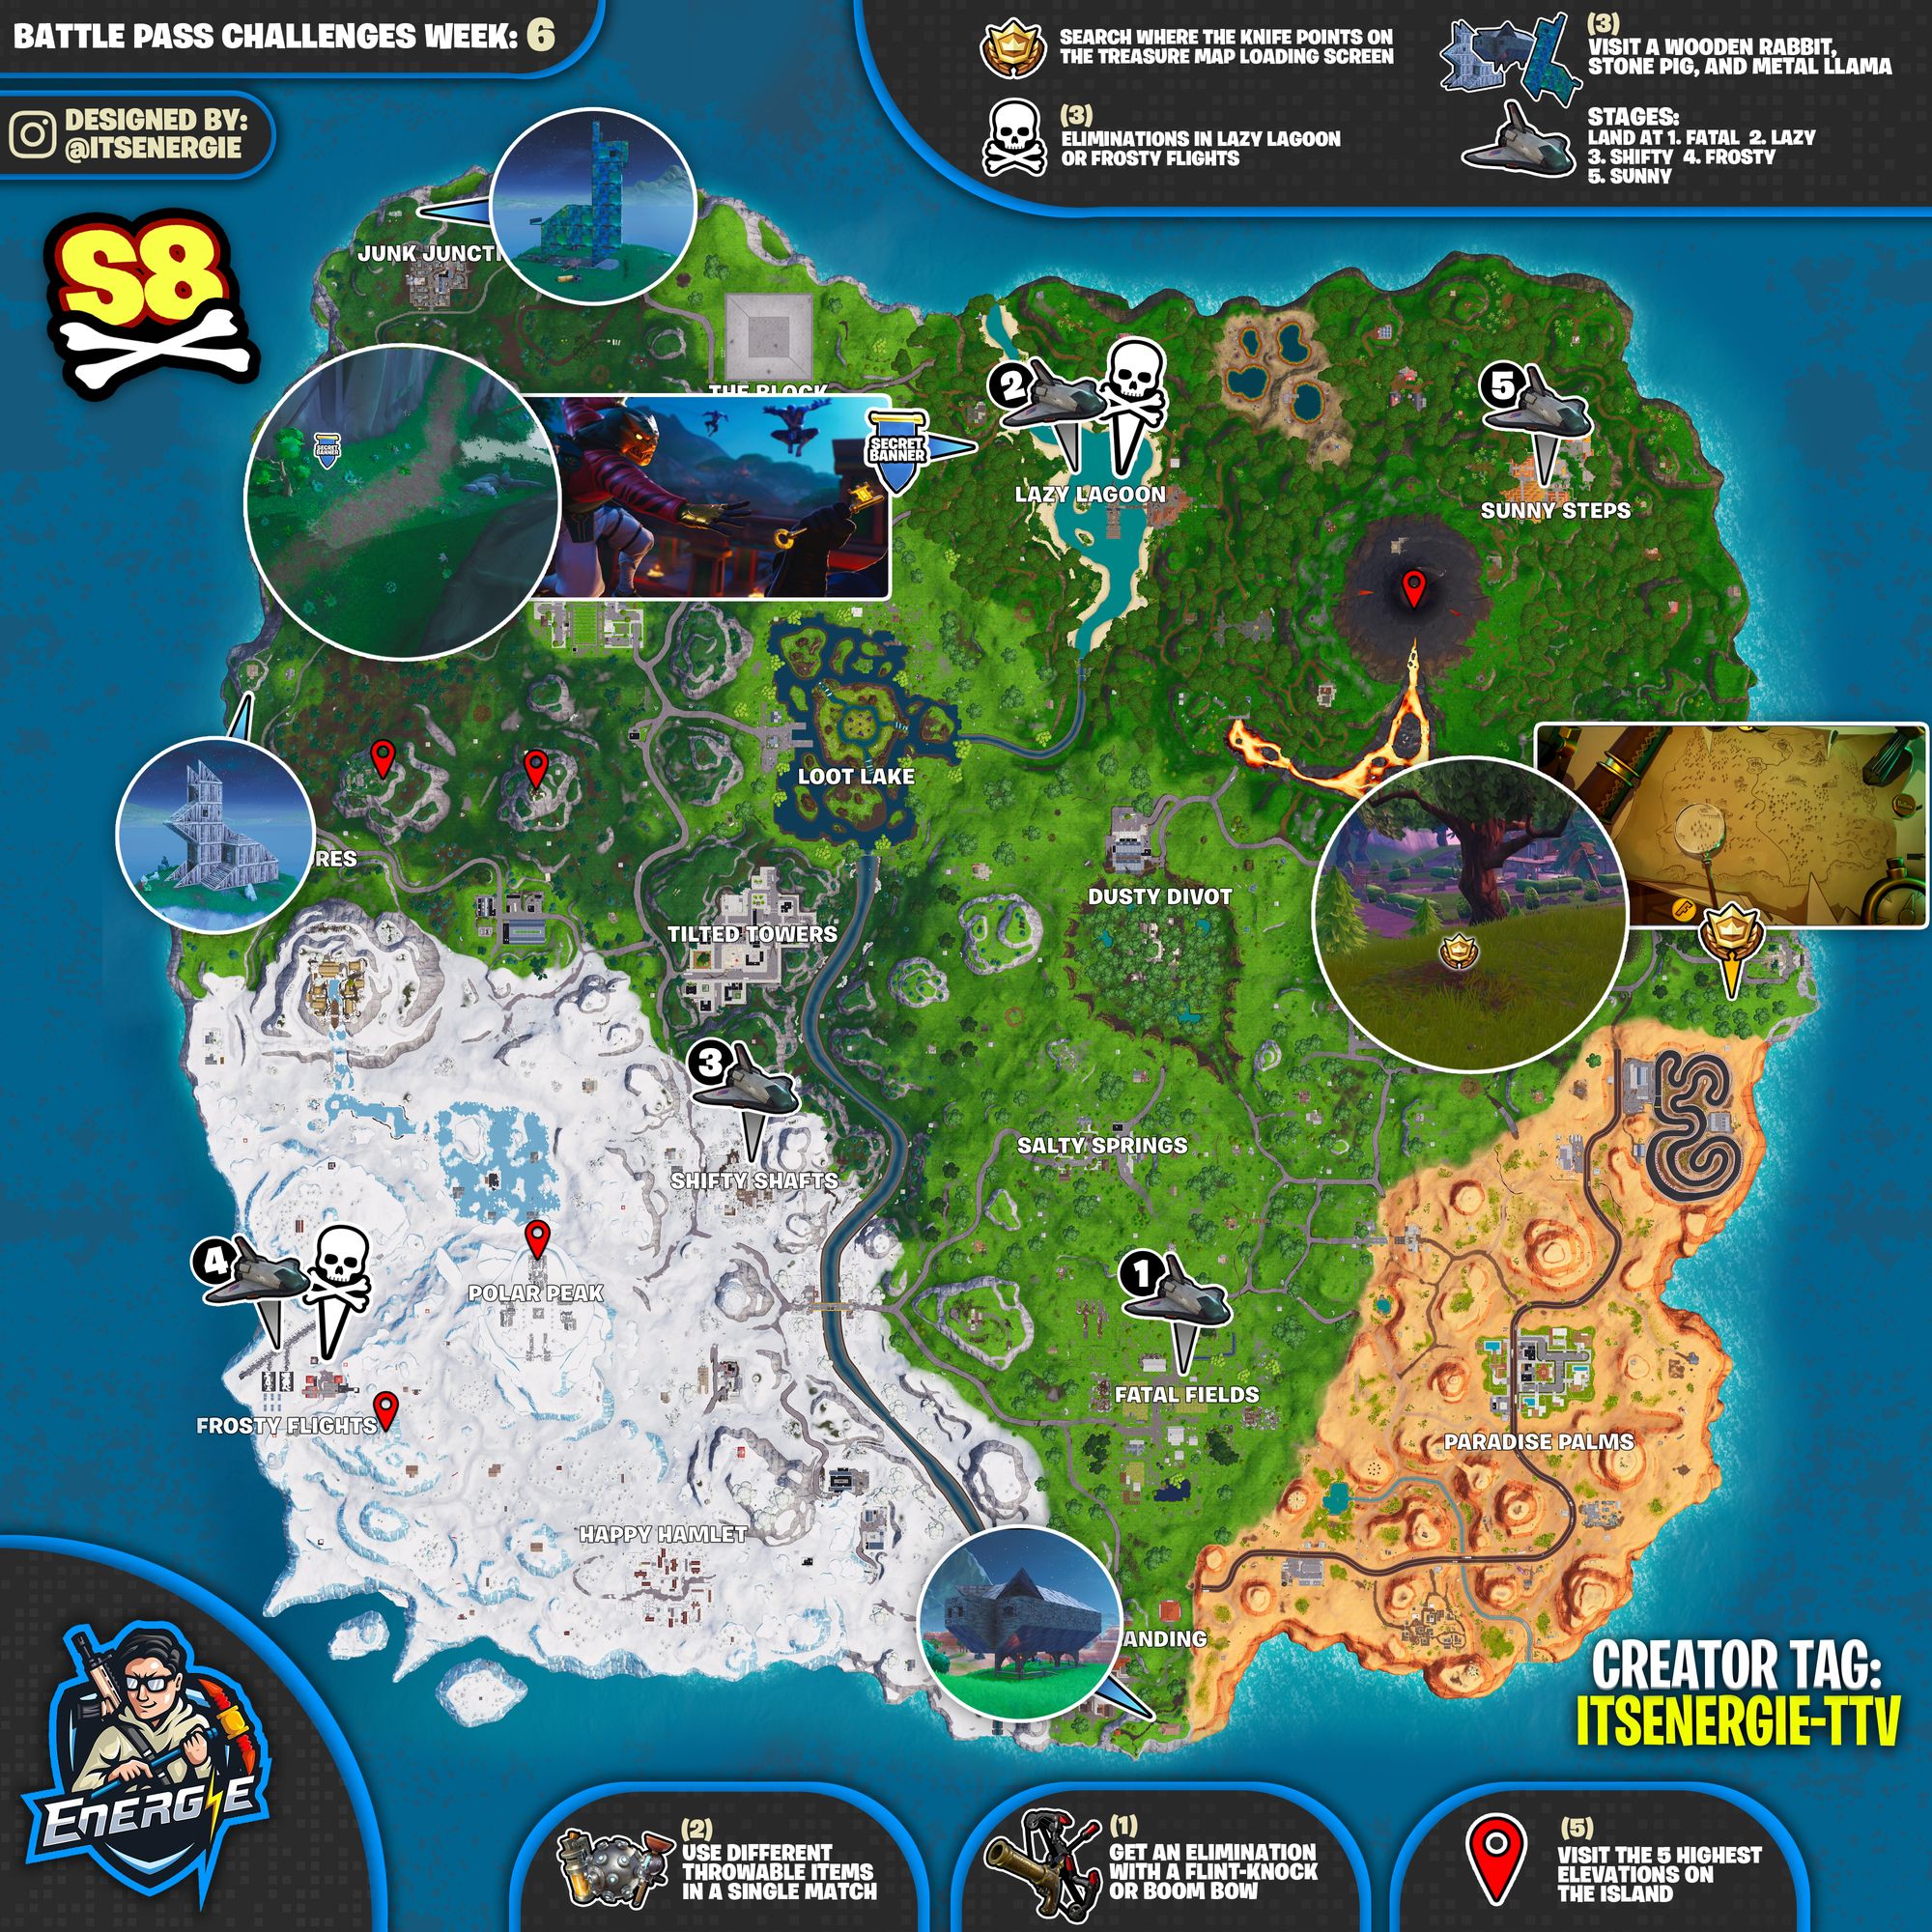 struggling with this week s challenges the cheat sheet mastermind itsenergie has put together another cheat sheet to make our lives a little bit easier - fortnite season 5 week 8 cheat sheet